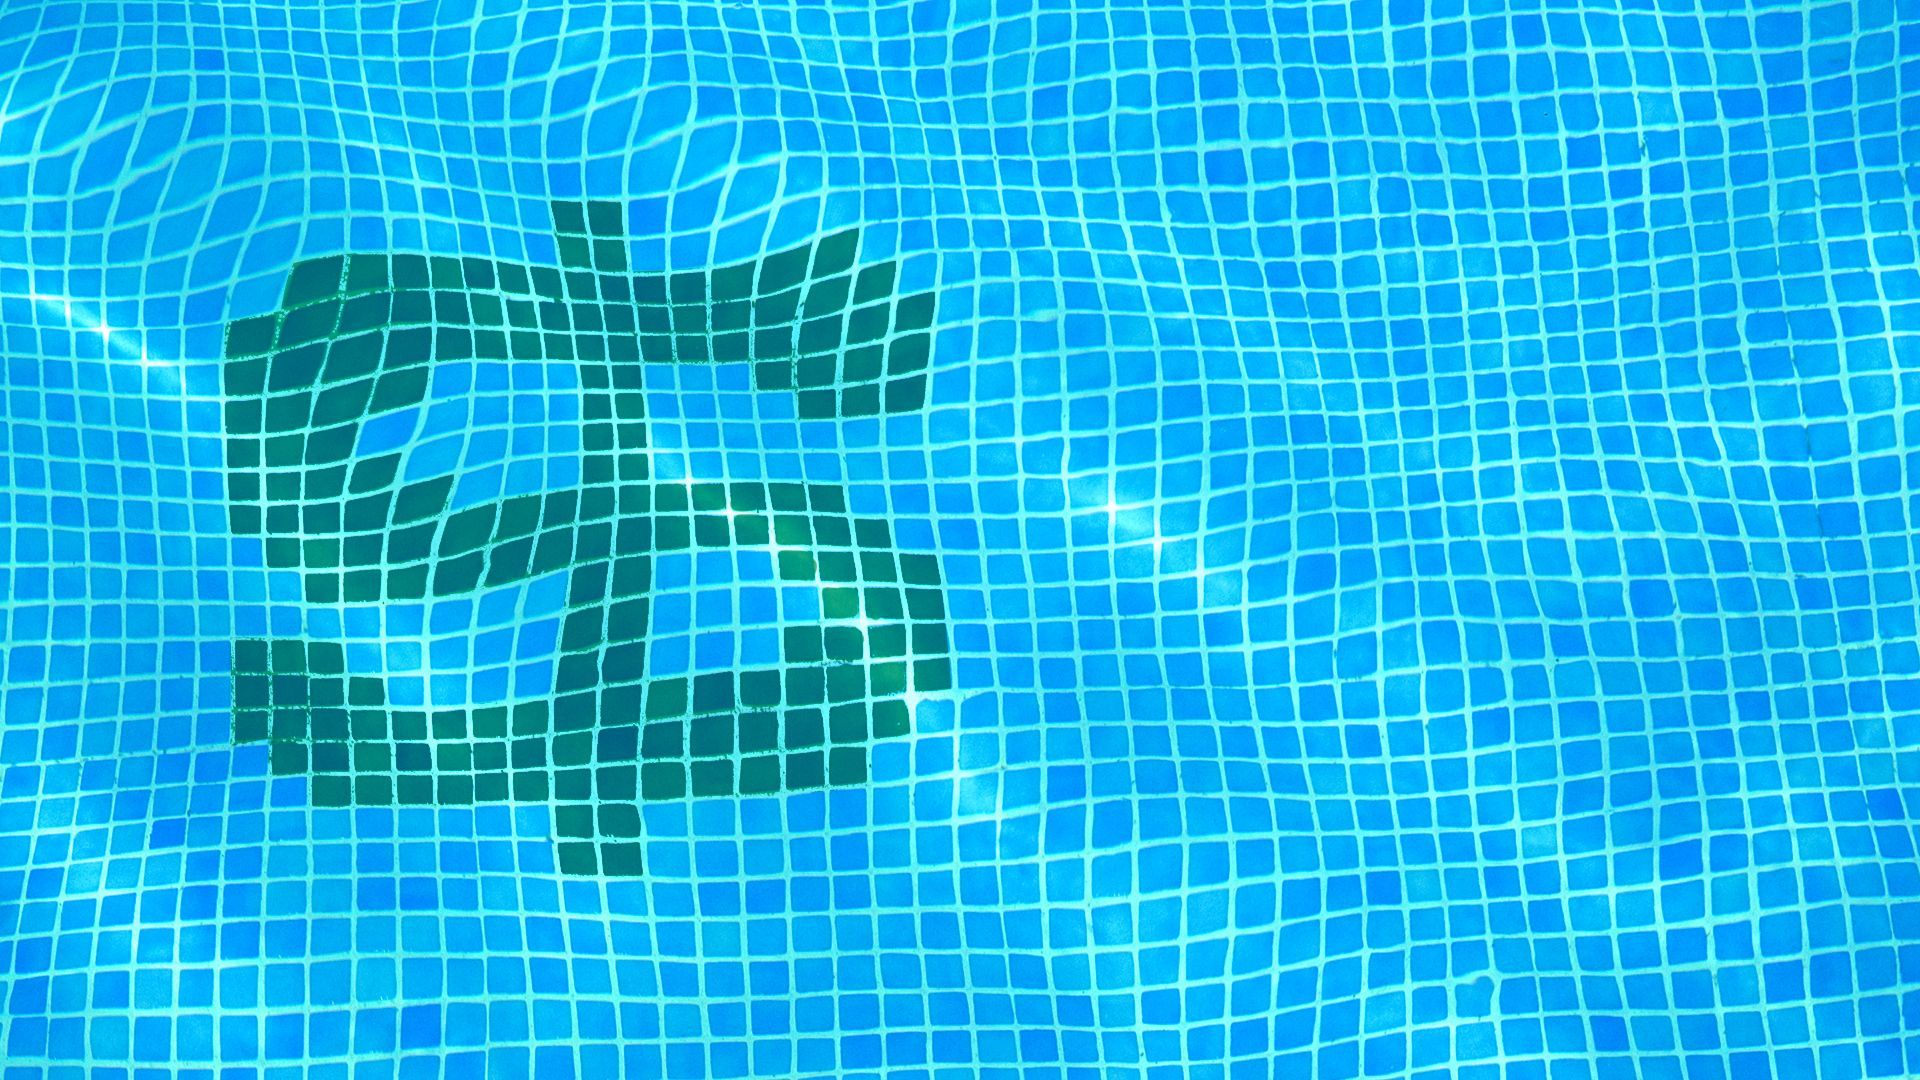 Illustration of a dollar sign made out of the tiles at the bottom of a pool.